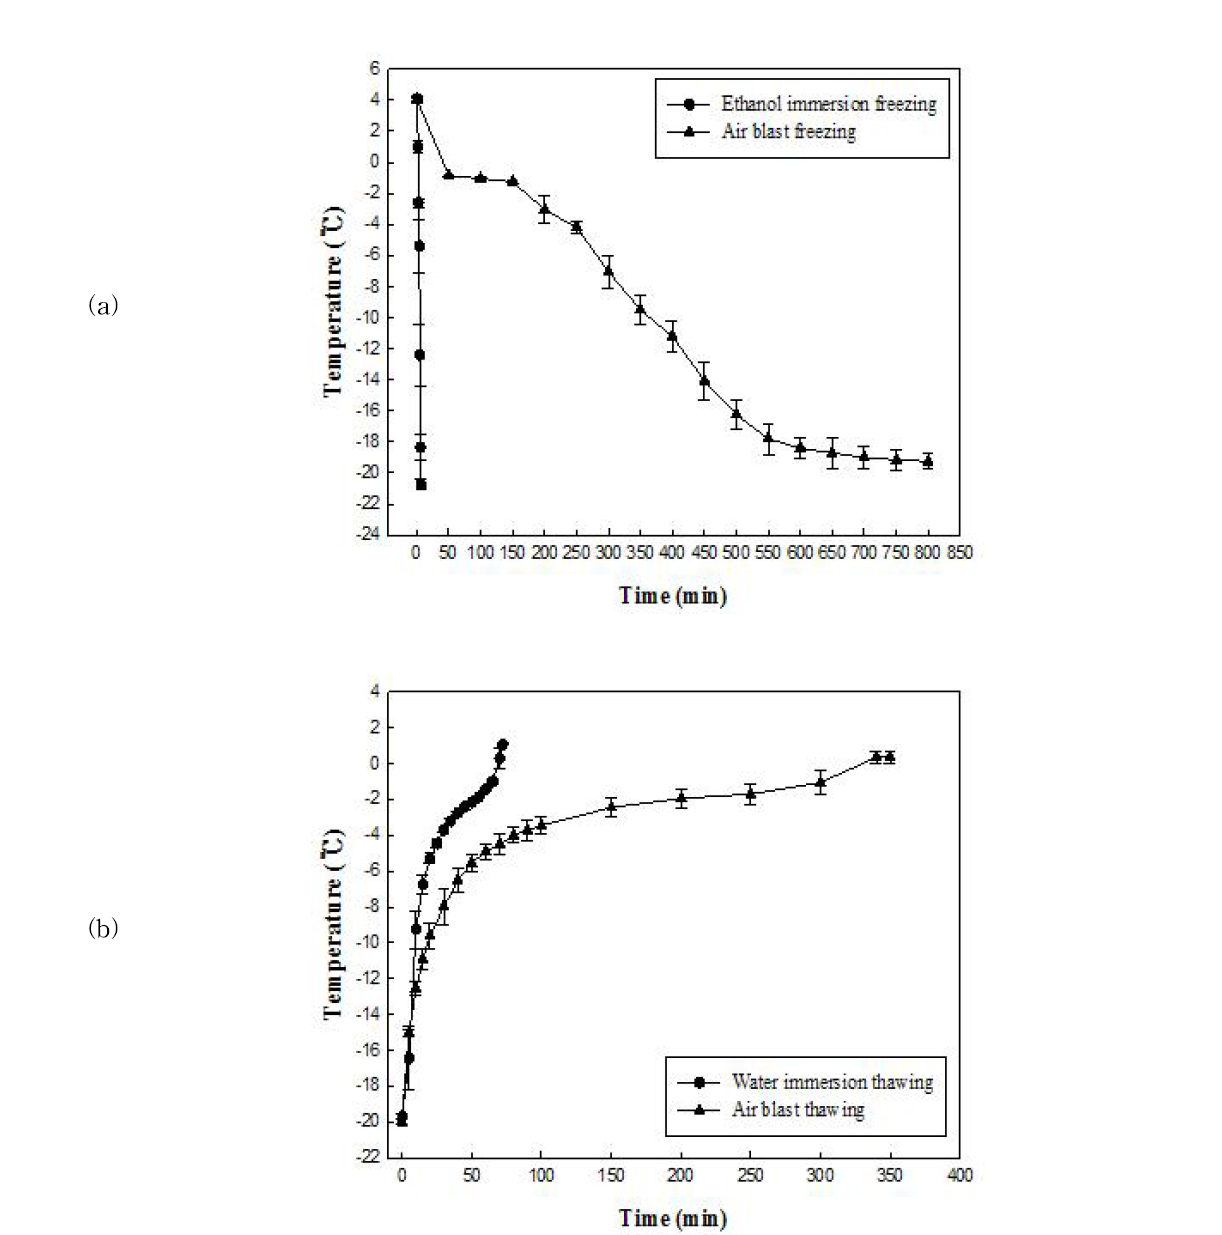 Time-temperature curves of Hanwoo beef according to freezing (a) and thawing (b) treatments